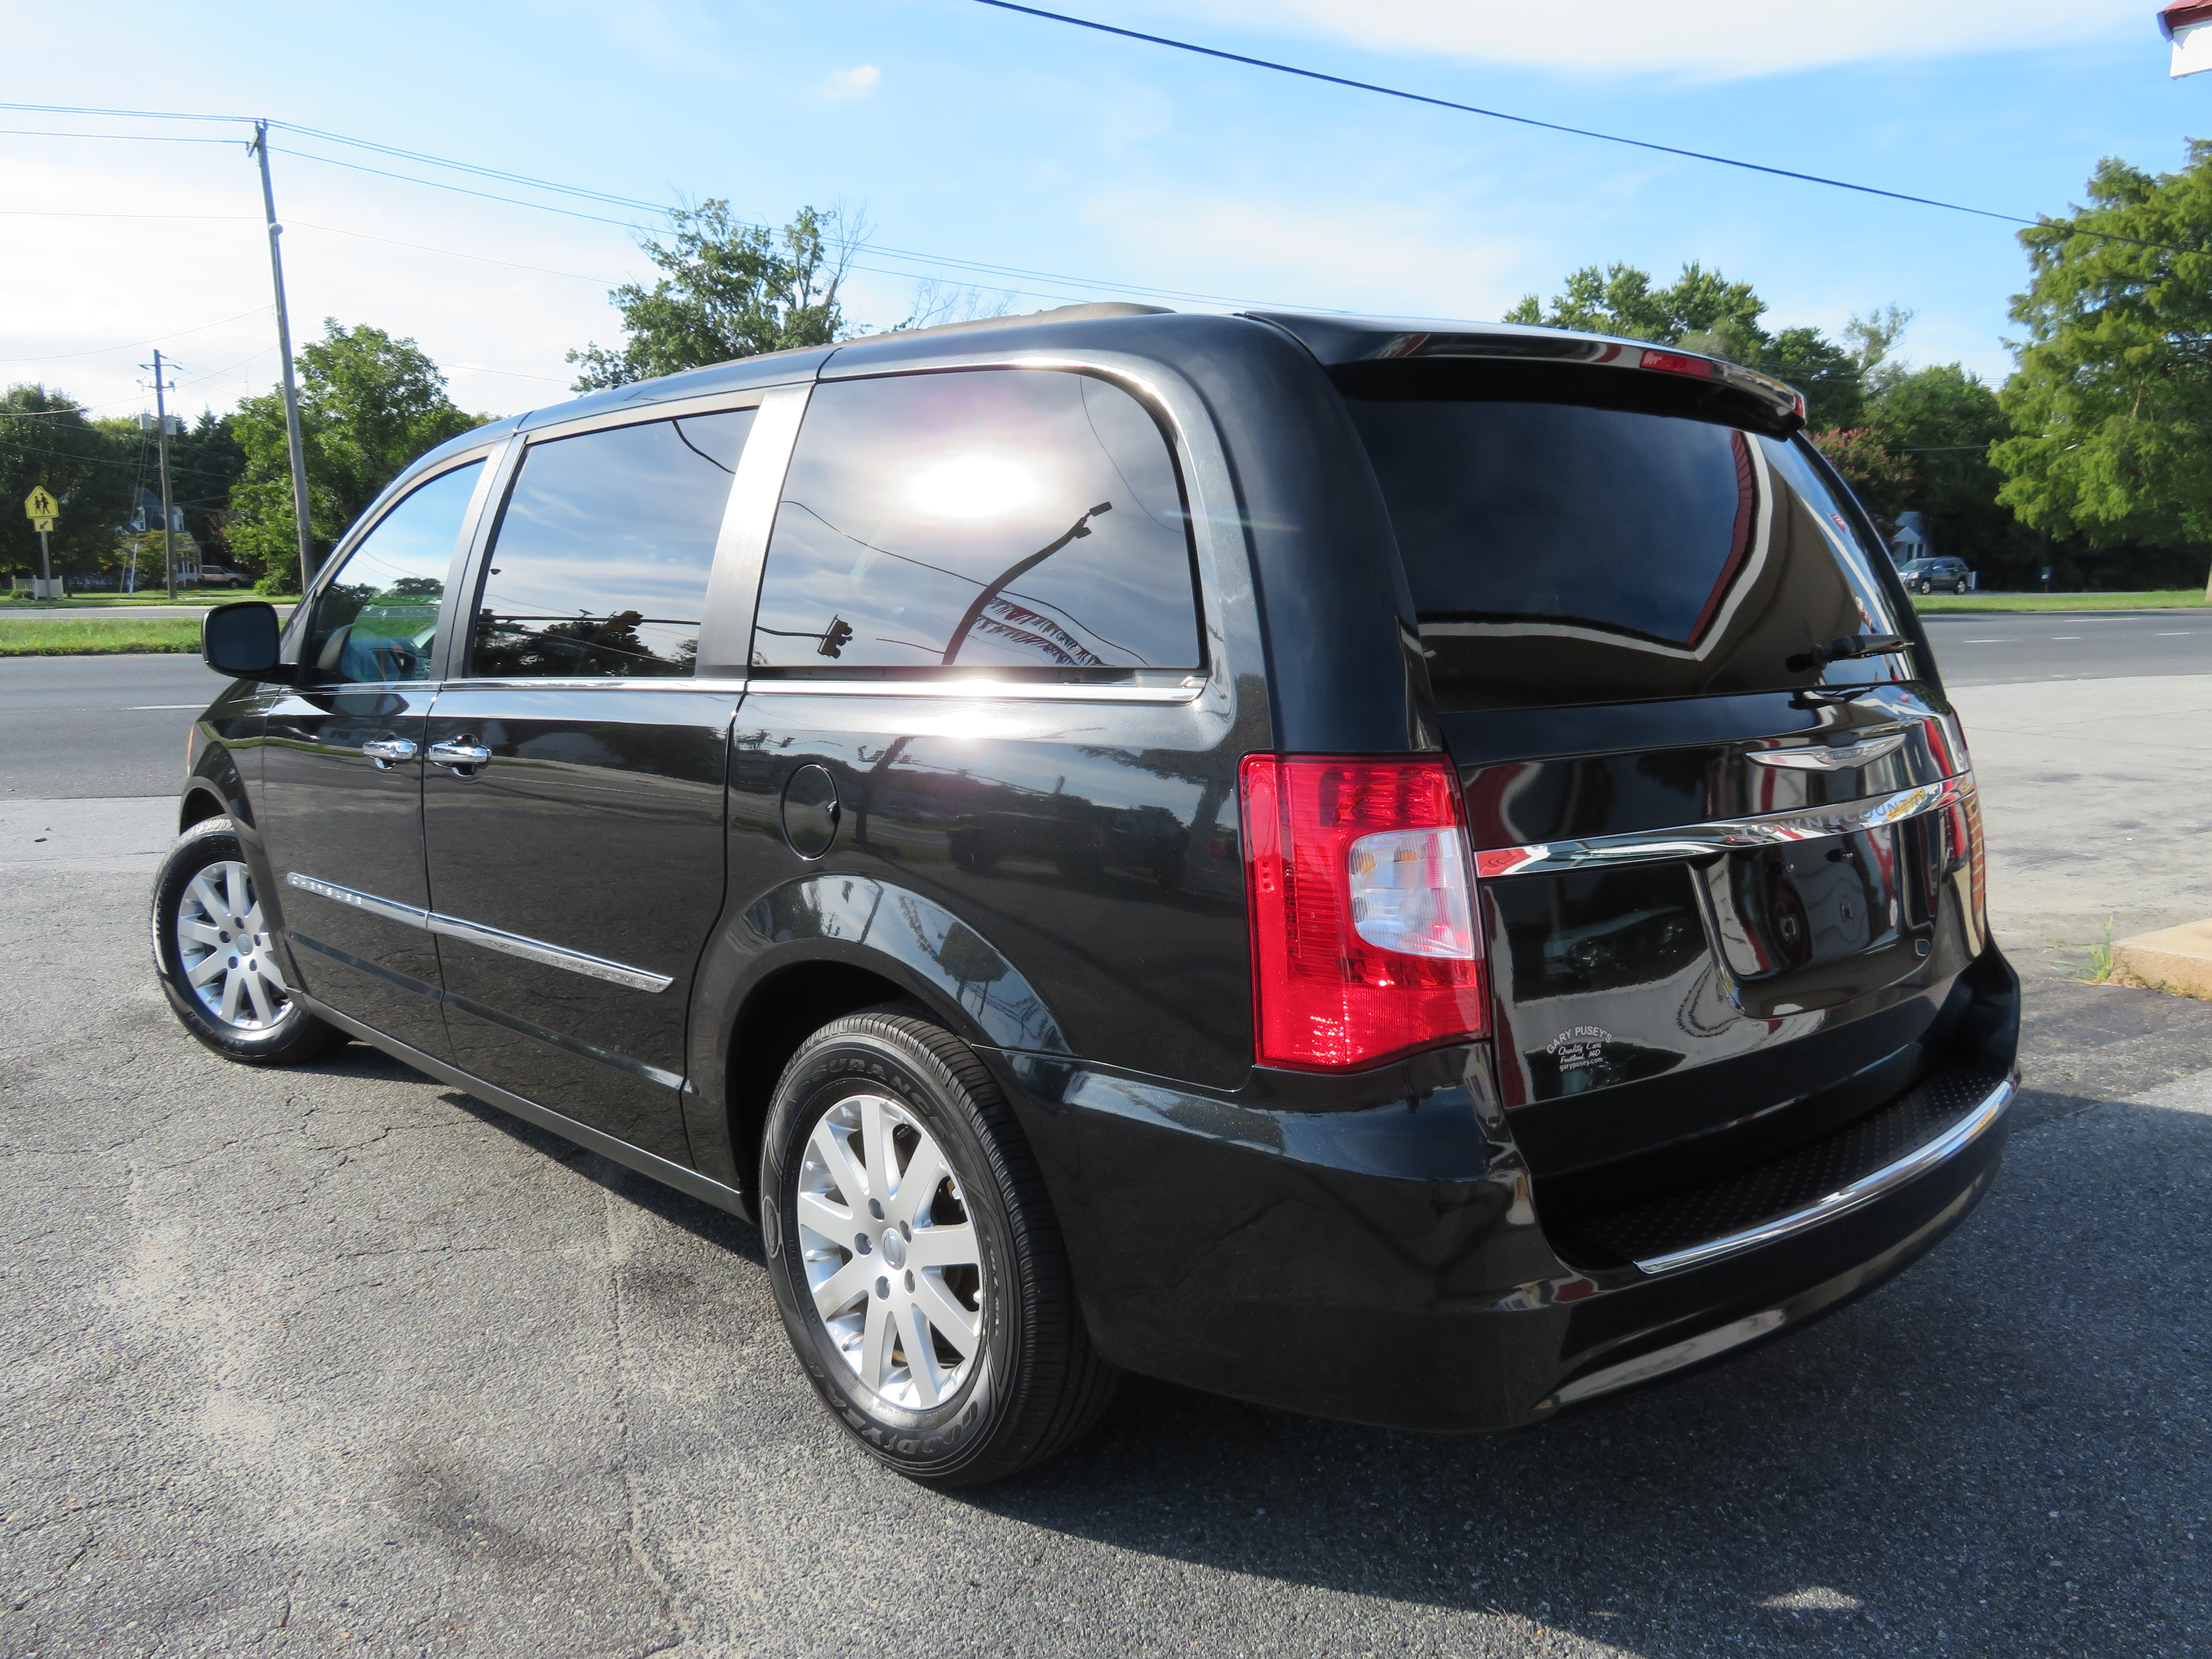 2016 Chrysler Town and Country "Touring"